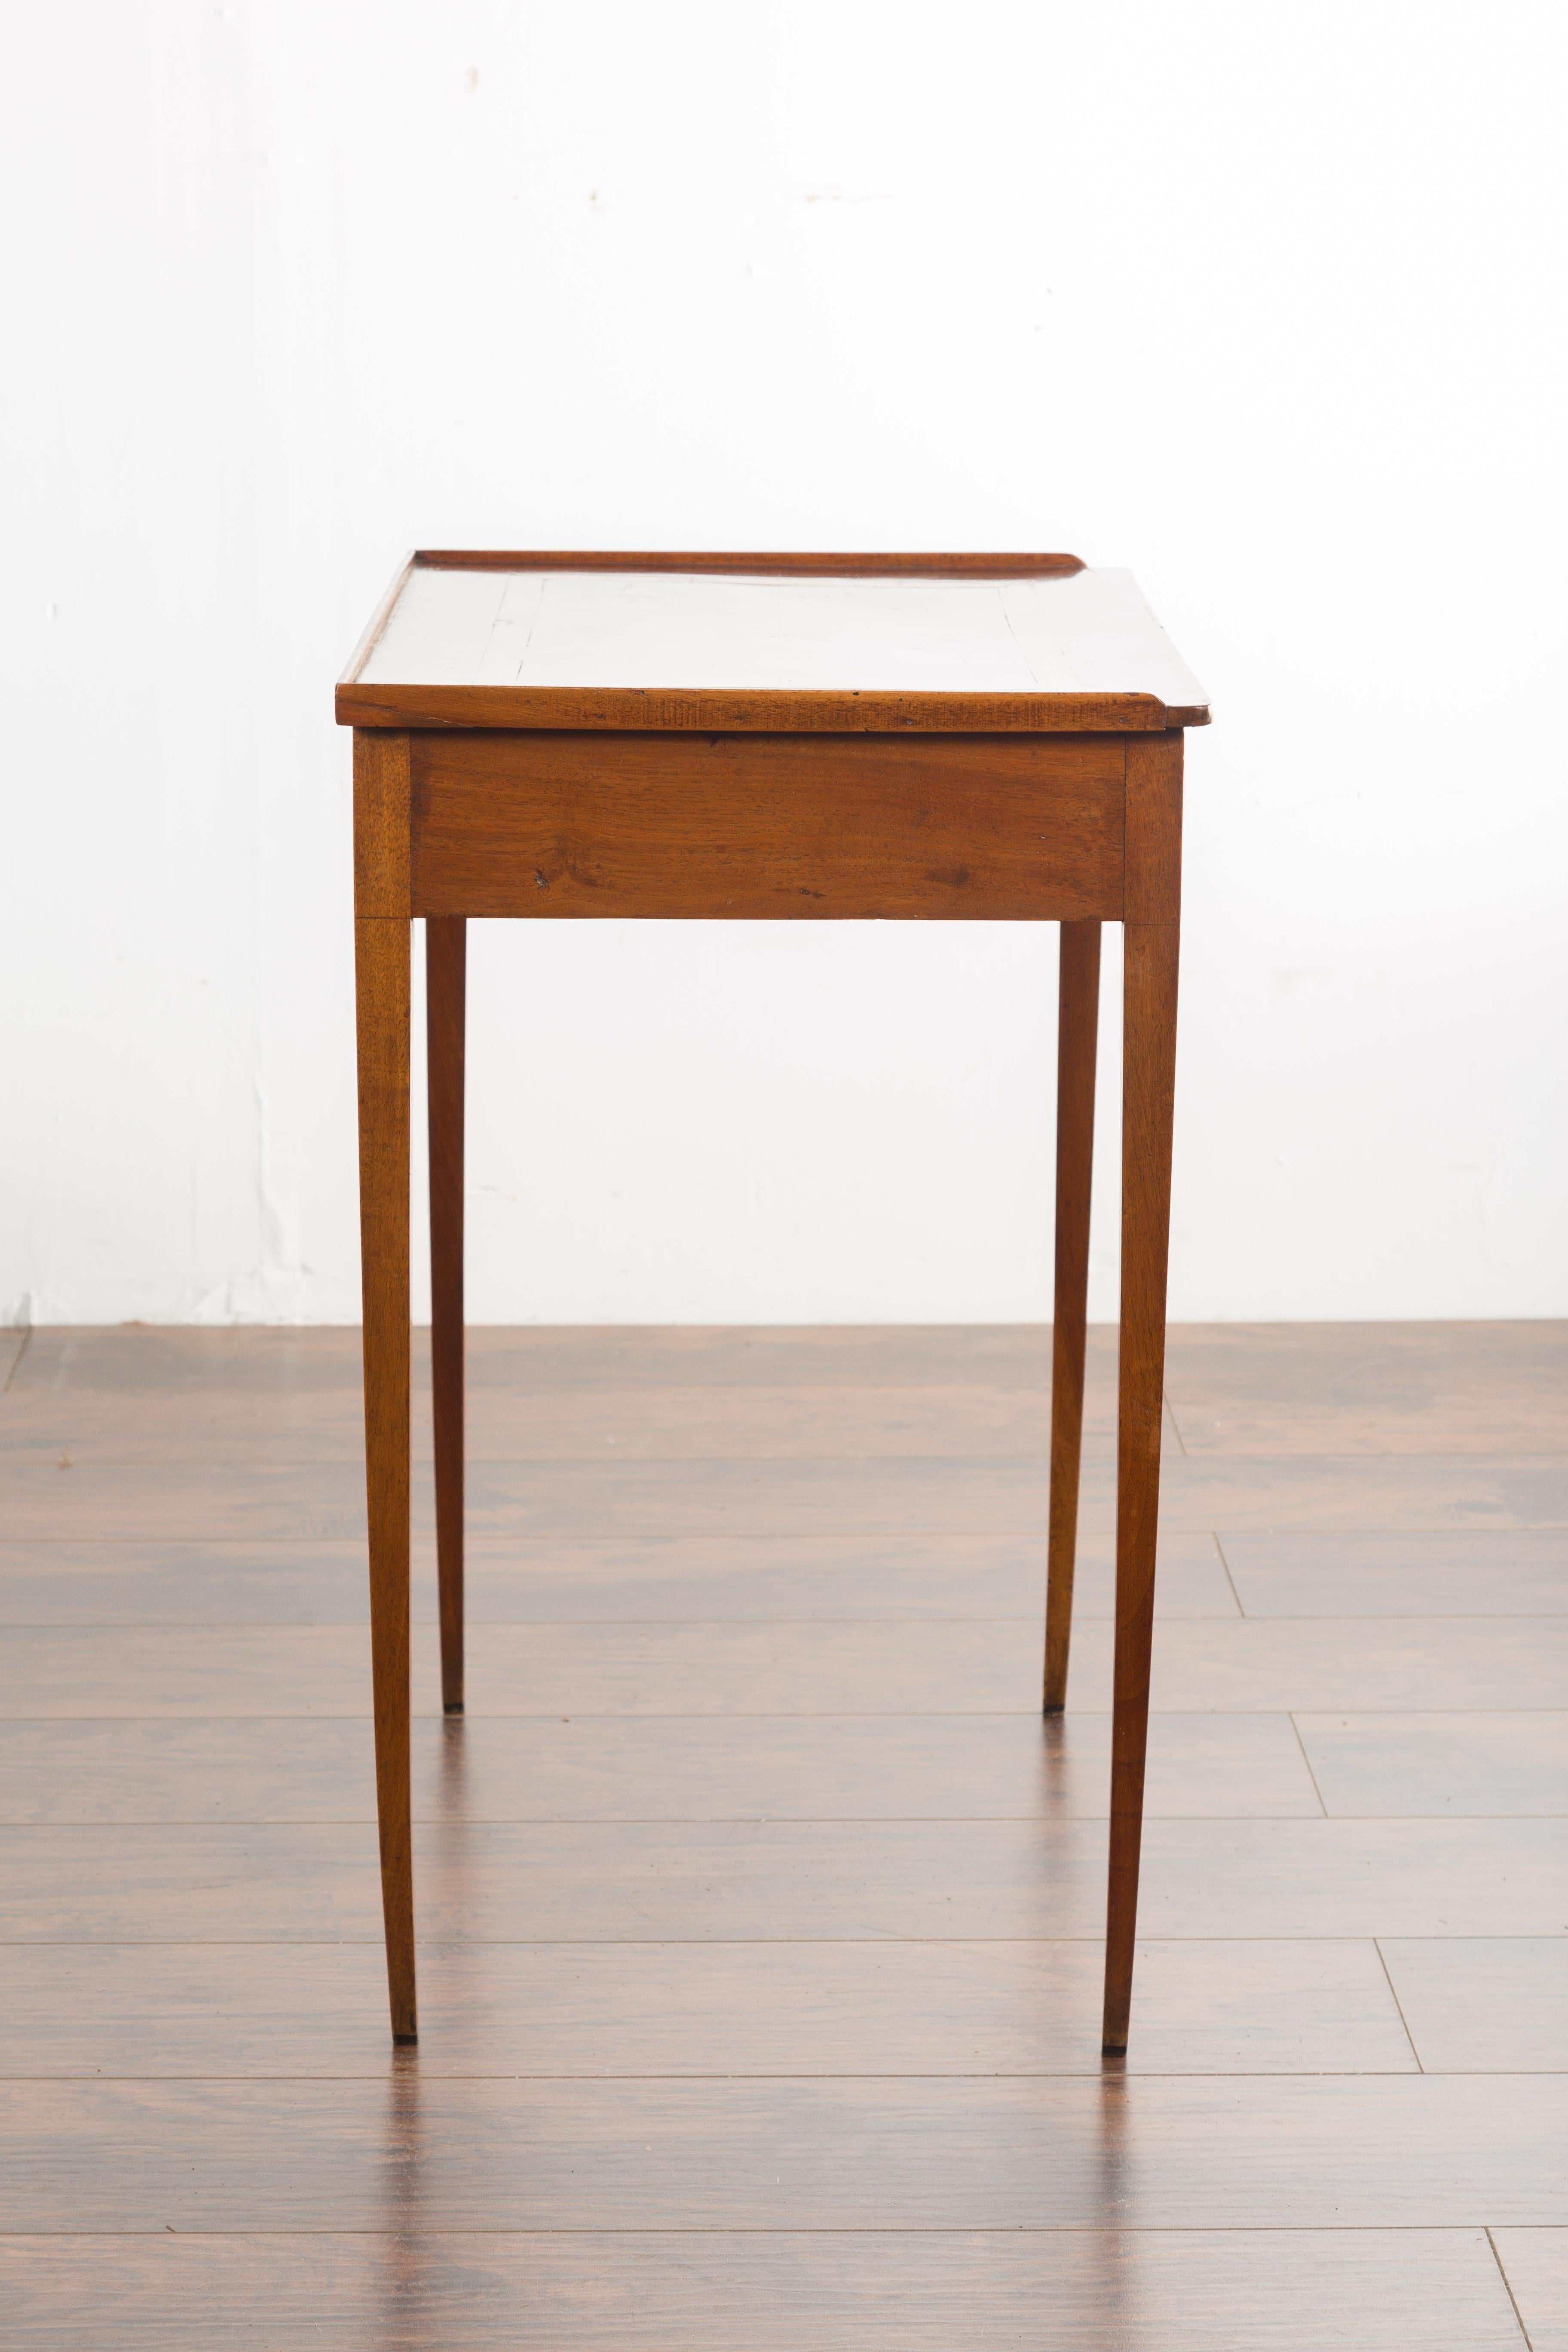 French 1870s Napoléon III Walnut Side Table with Star Inlay and Single Drawer For Sale 12